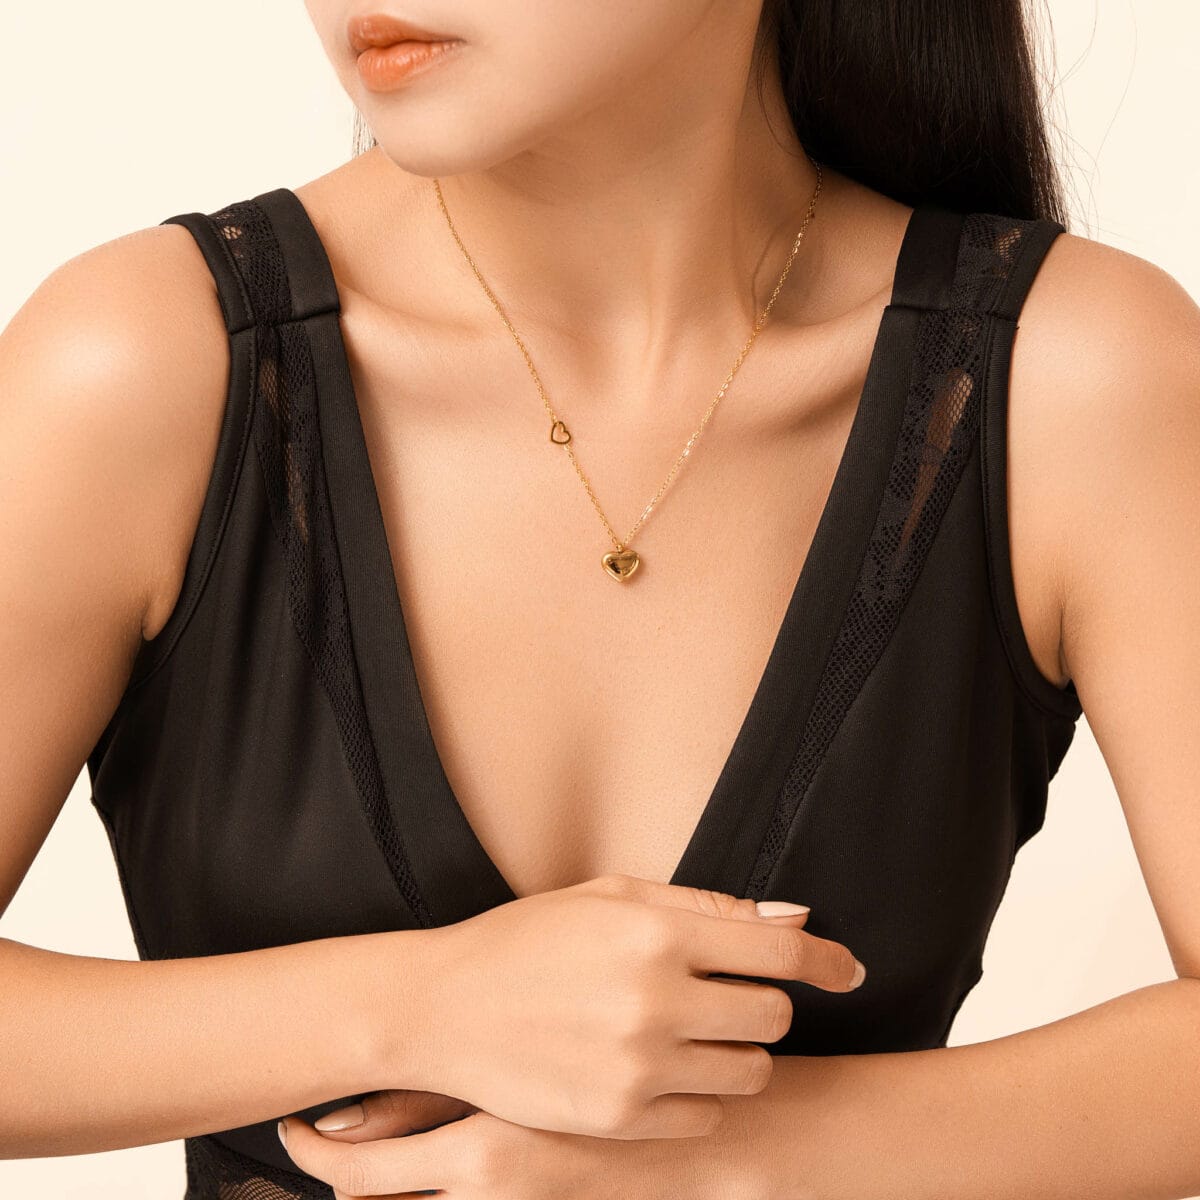 https://m.clubbella.co/product/bliss-duo-heart-necklace/ Bliss Duo Gold Necklace (1)